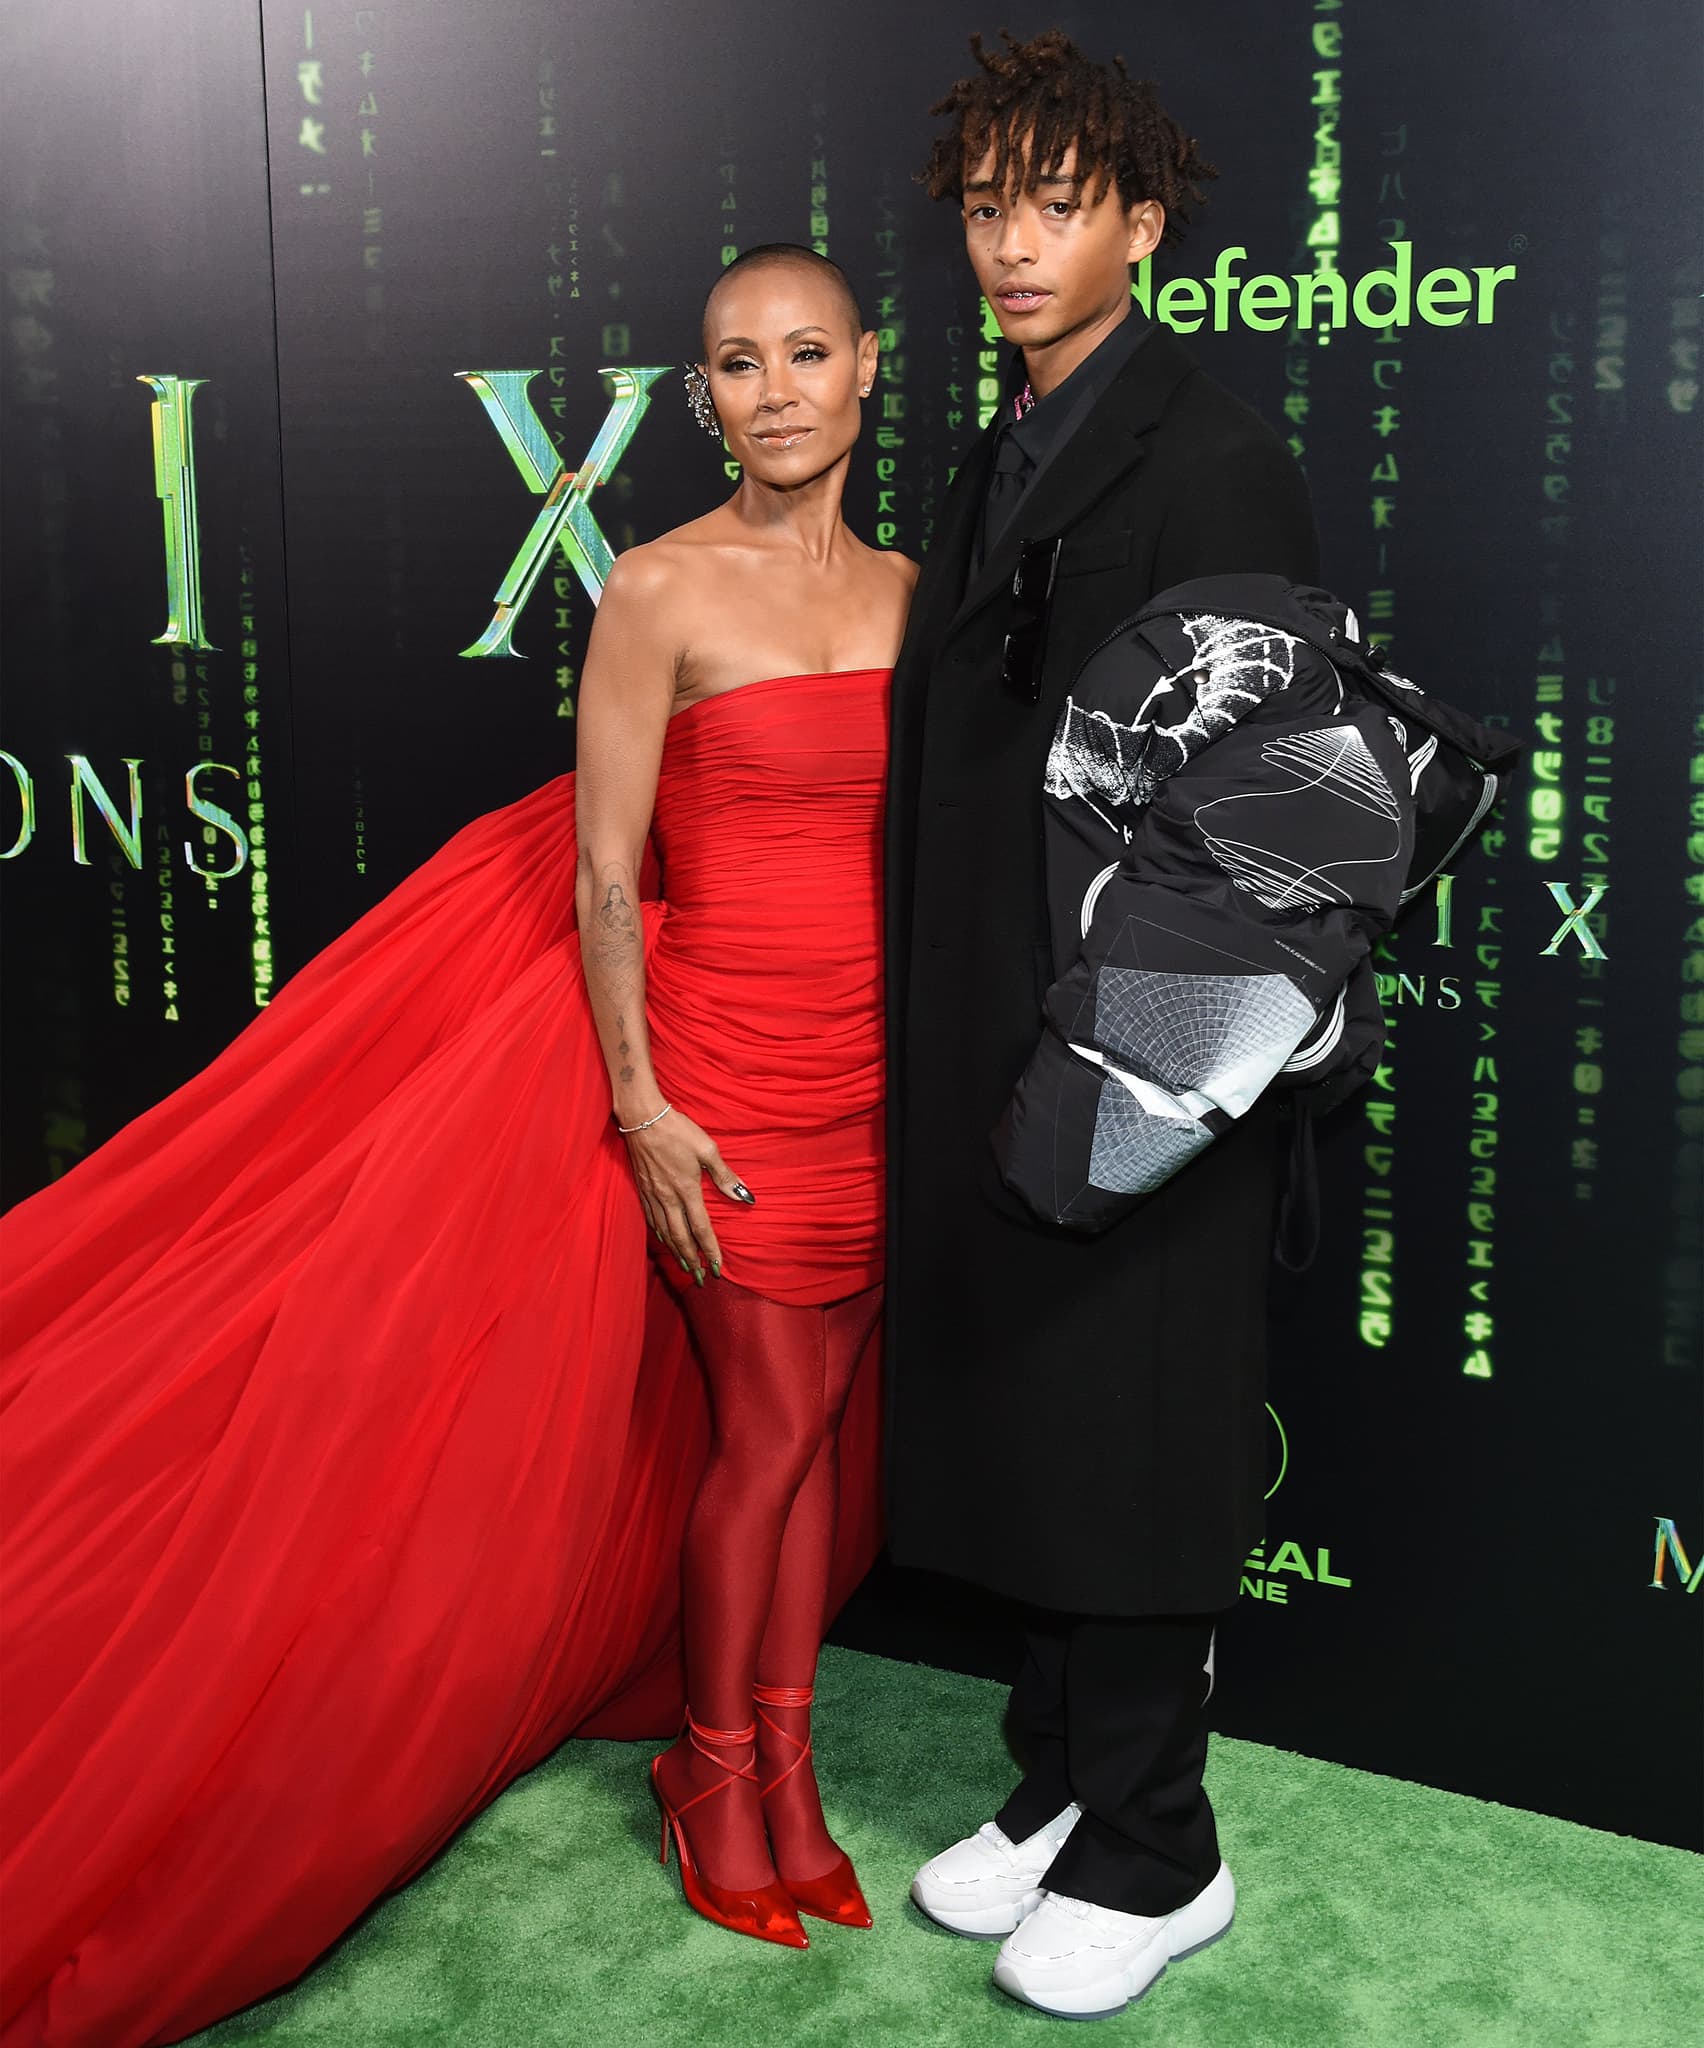 Jada Pinkett Smith poses with her son, Jaden Smith, who's clad in a black coat and white sneakers